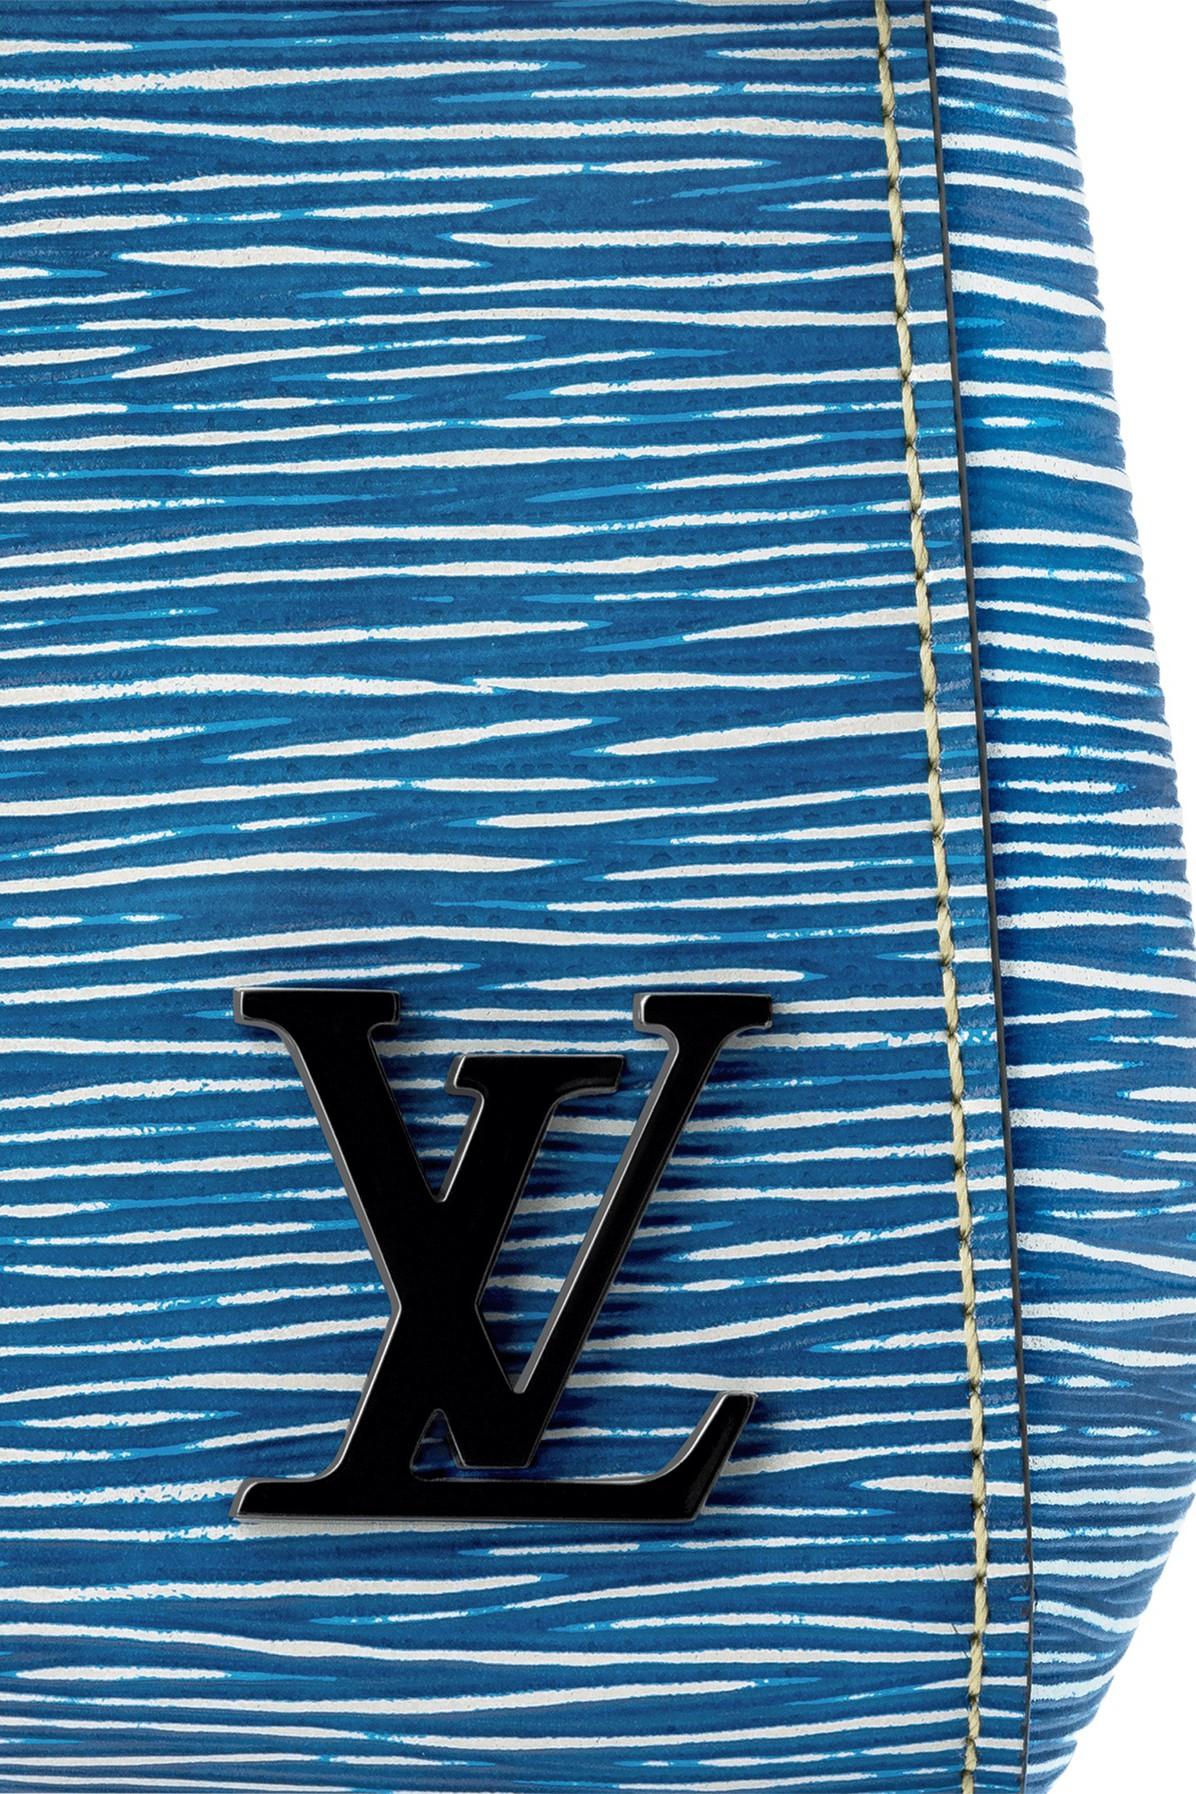 Louis Vuitton Cluny Bb in Blue